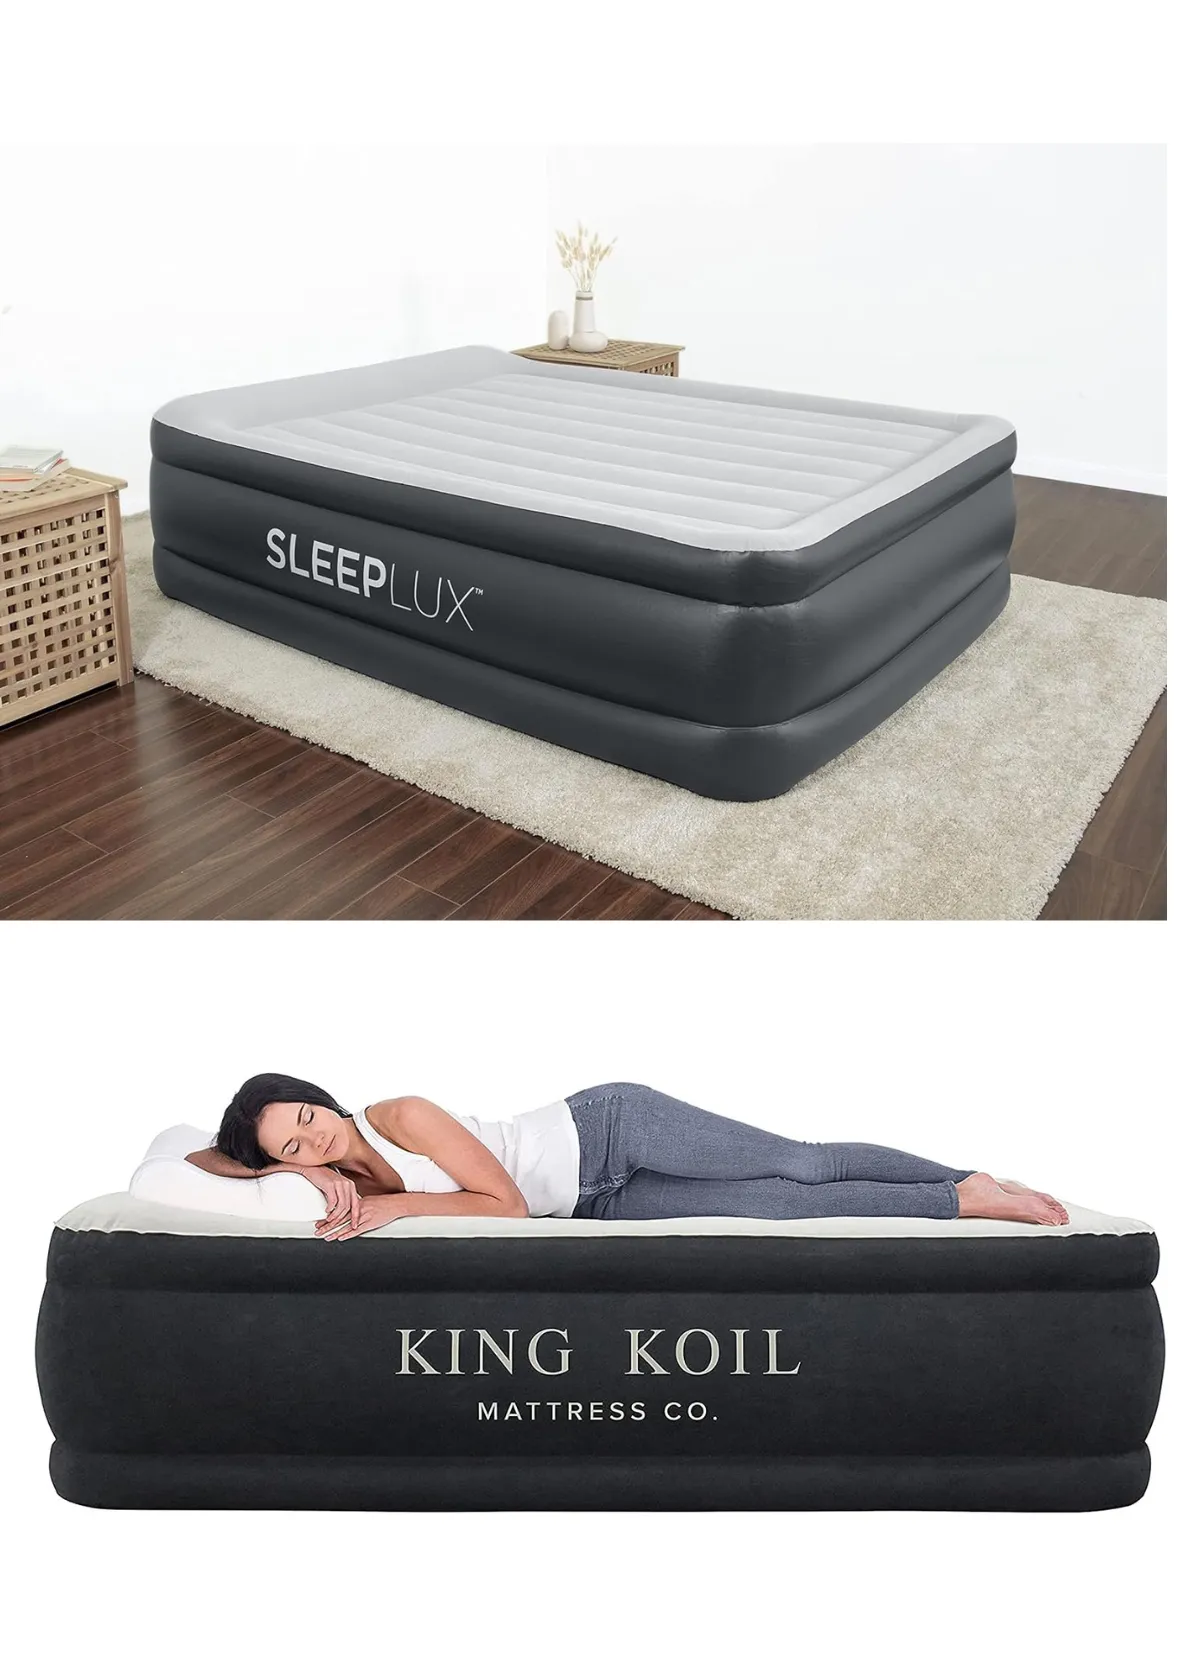 "Is an Inflatable Mattress the Best for Travel Comfort?"